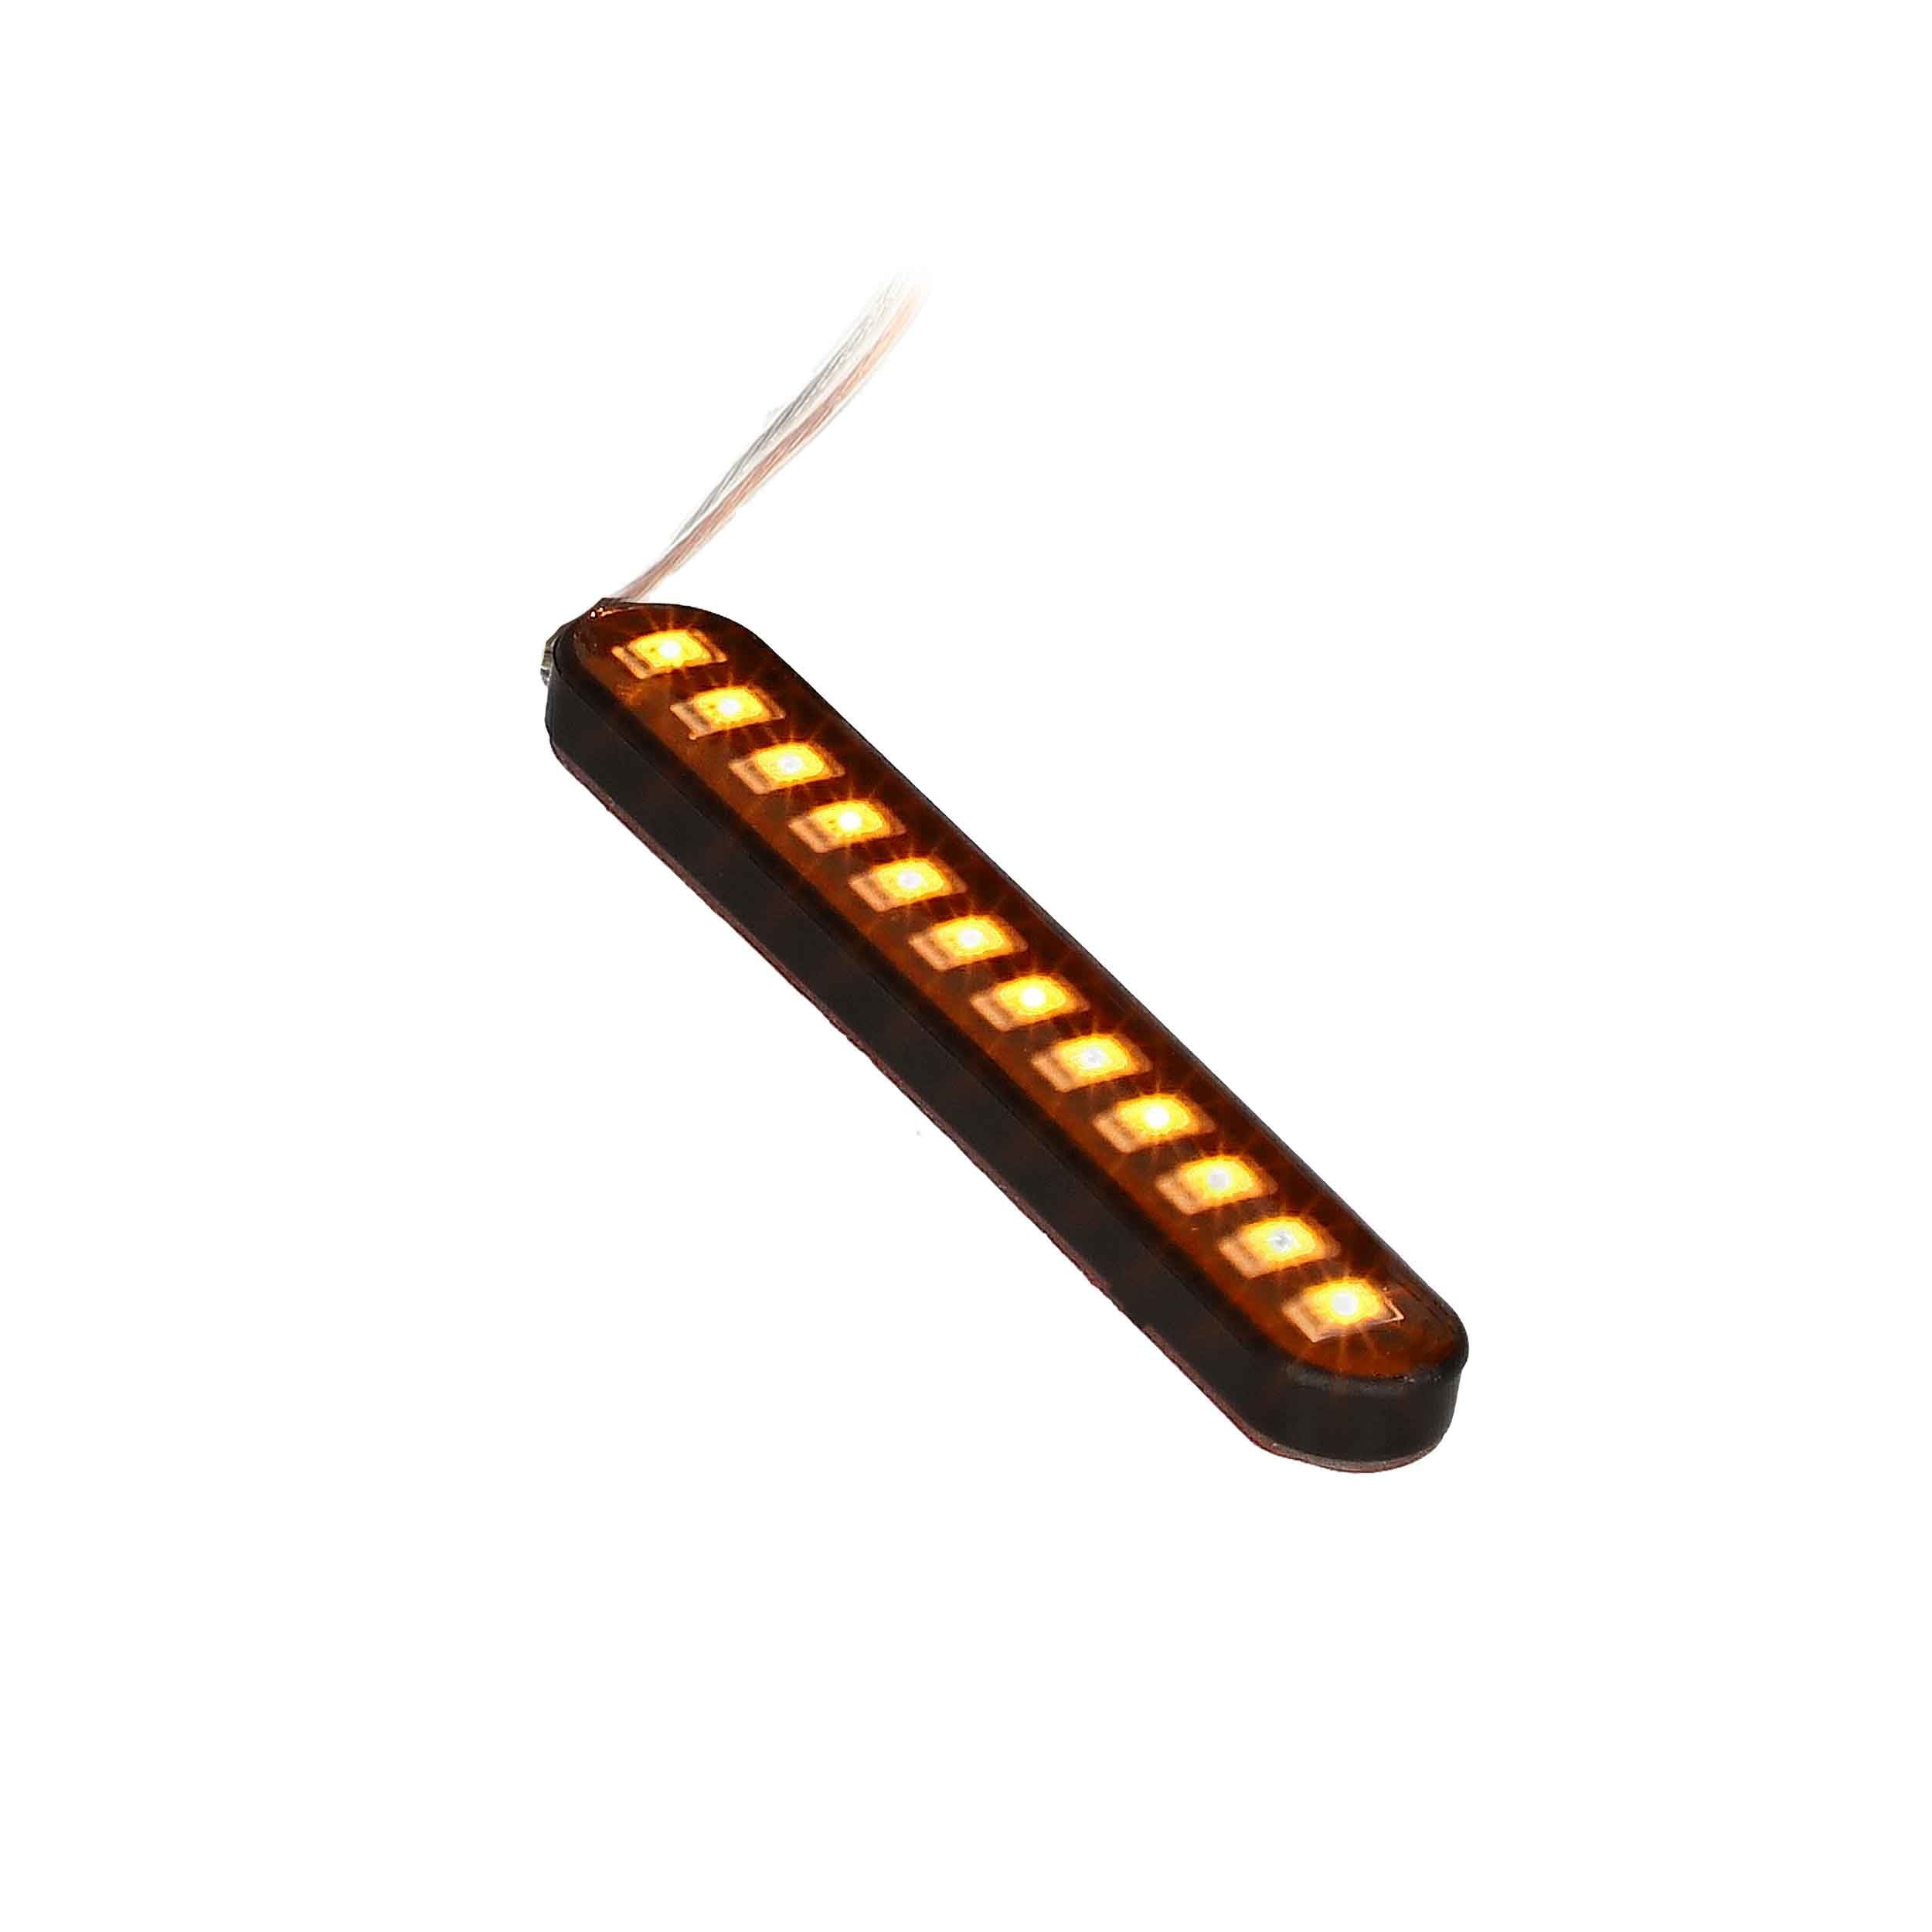 Saddle Tramp BC-STS3 - Amber Sequential Turn Signal - 3 Inch, 12 LED, Set of 2